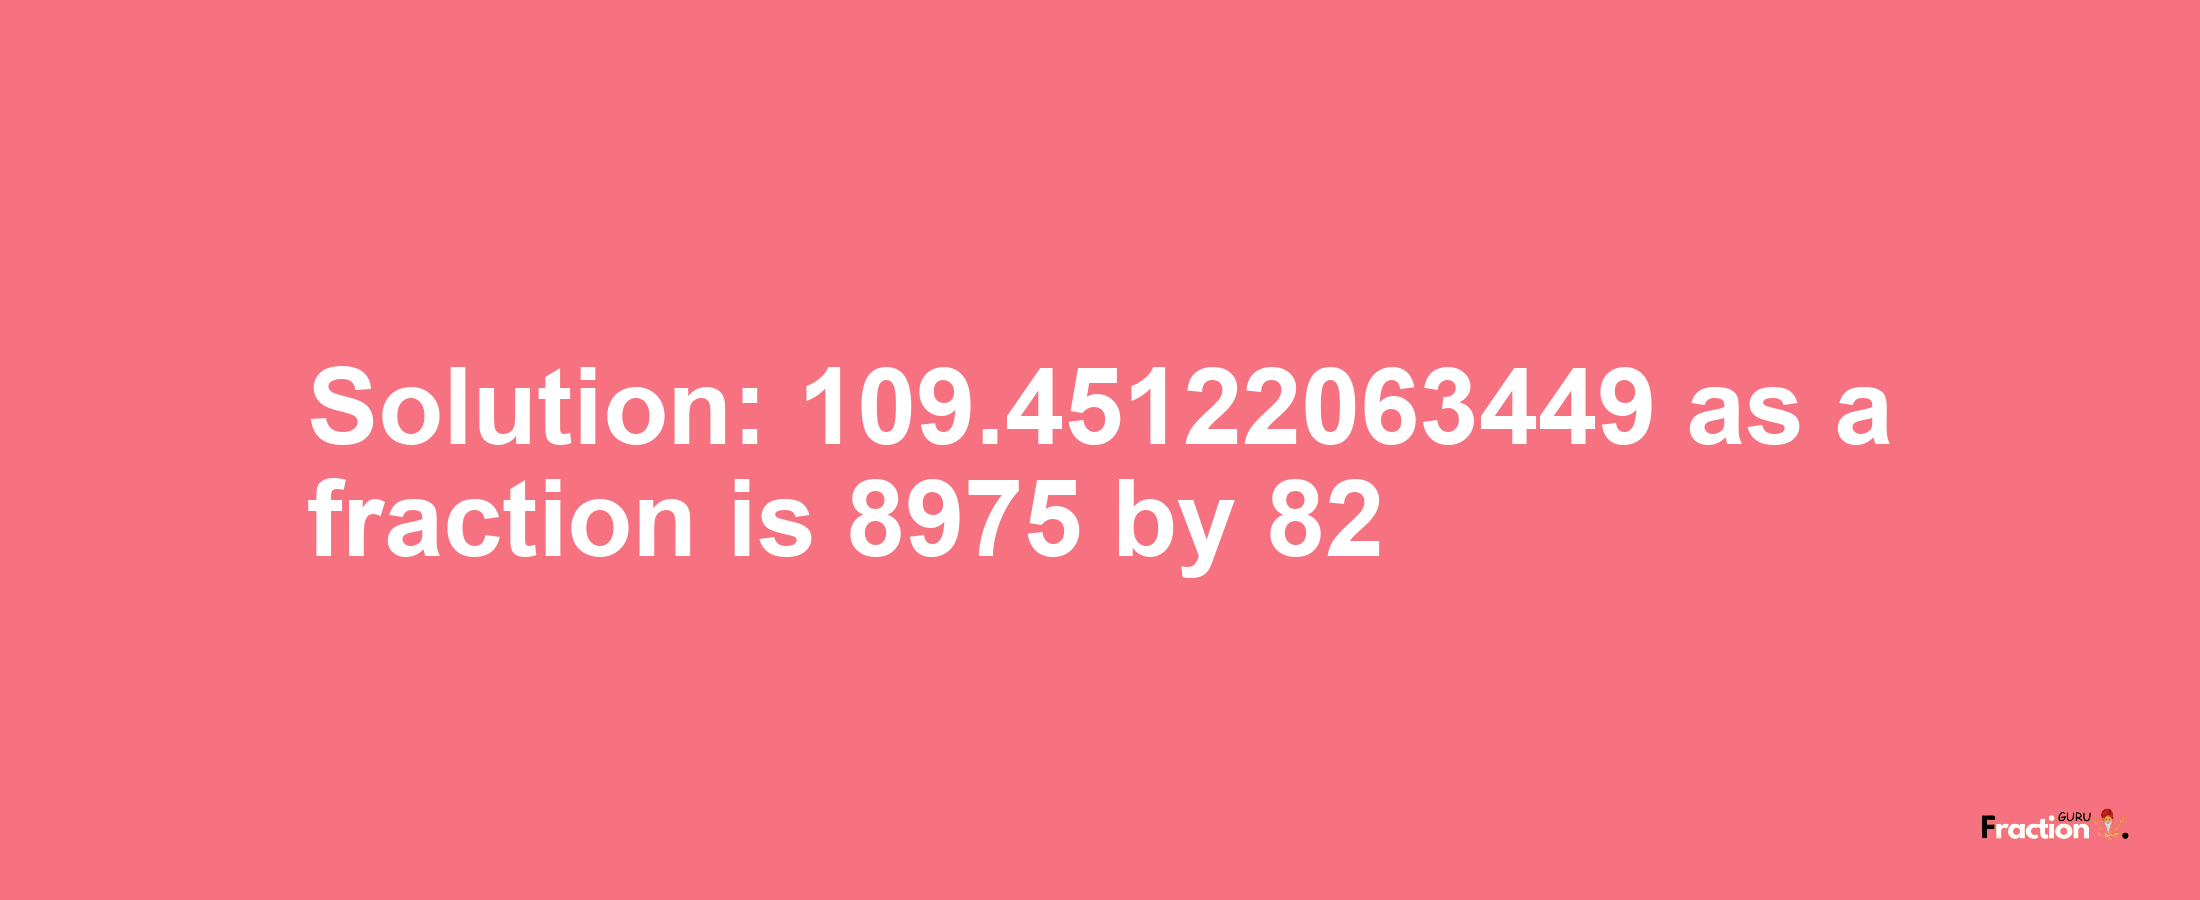 Solution:109.45122063449 as a fraction is 8975/82